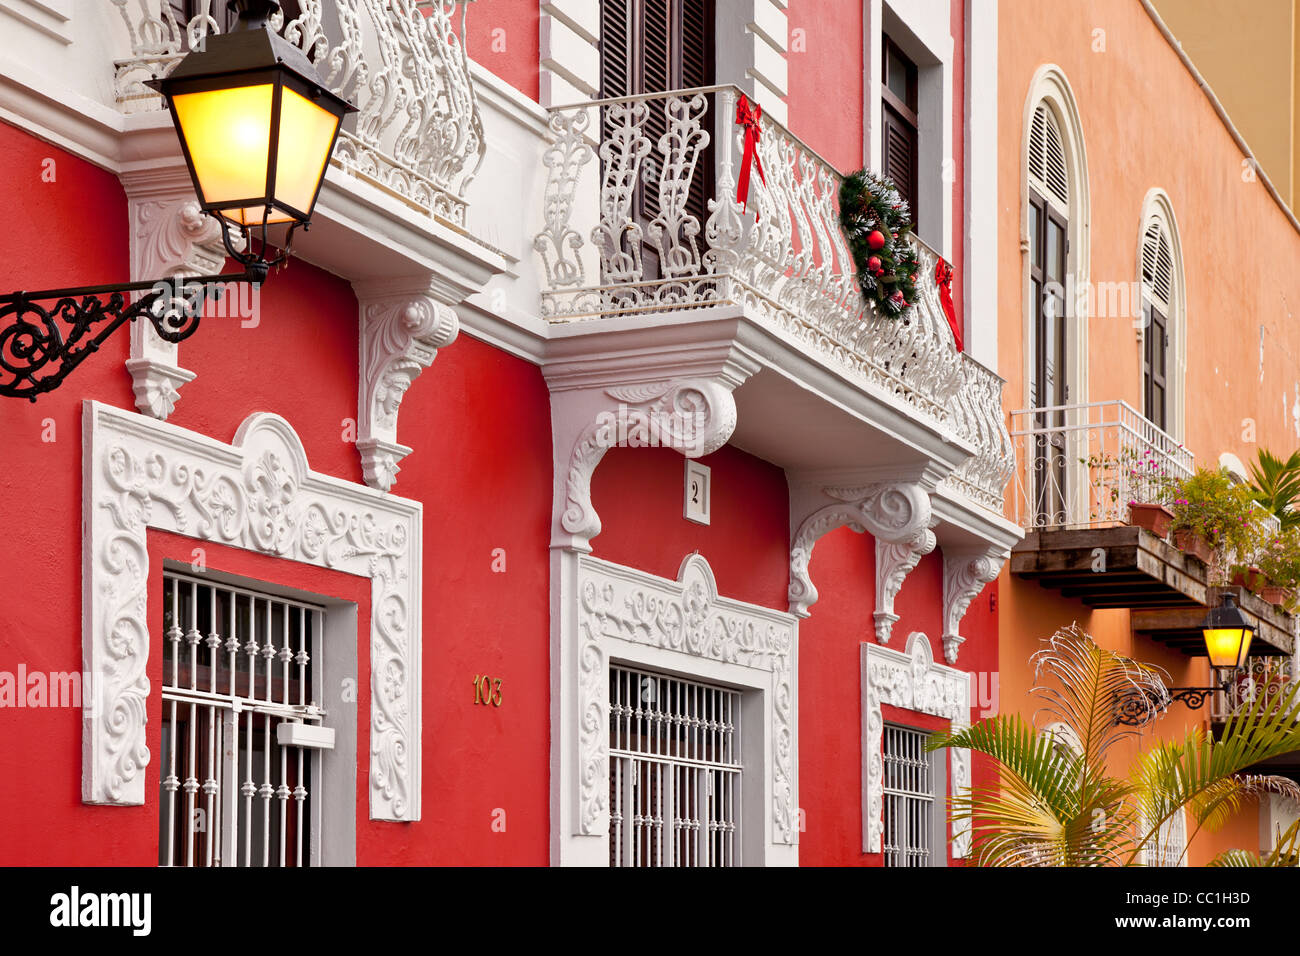 Colorful buildings in old town San Juan Puerto Rico Stock Photo